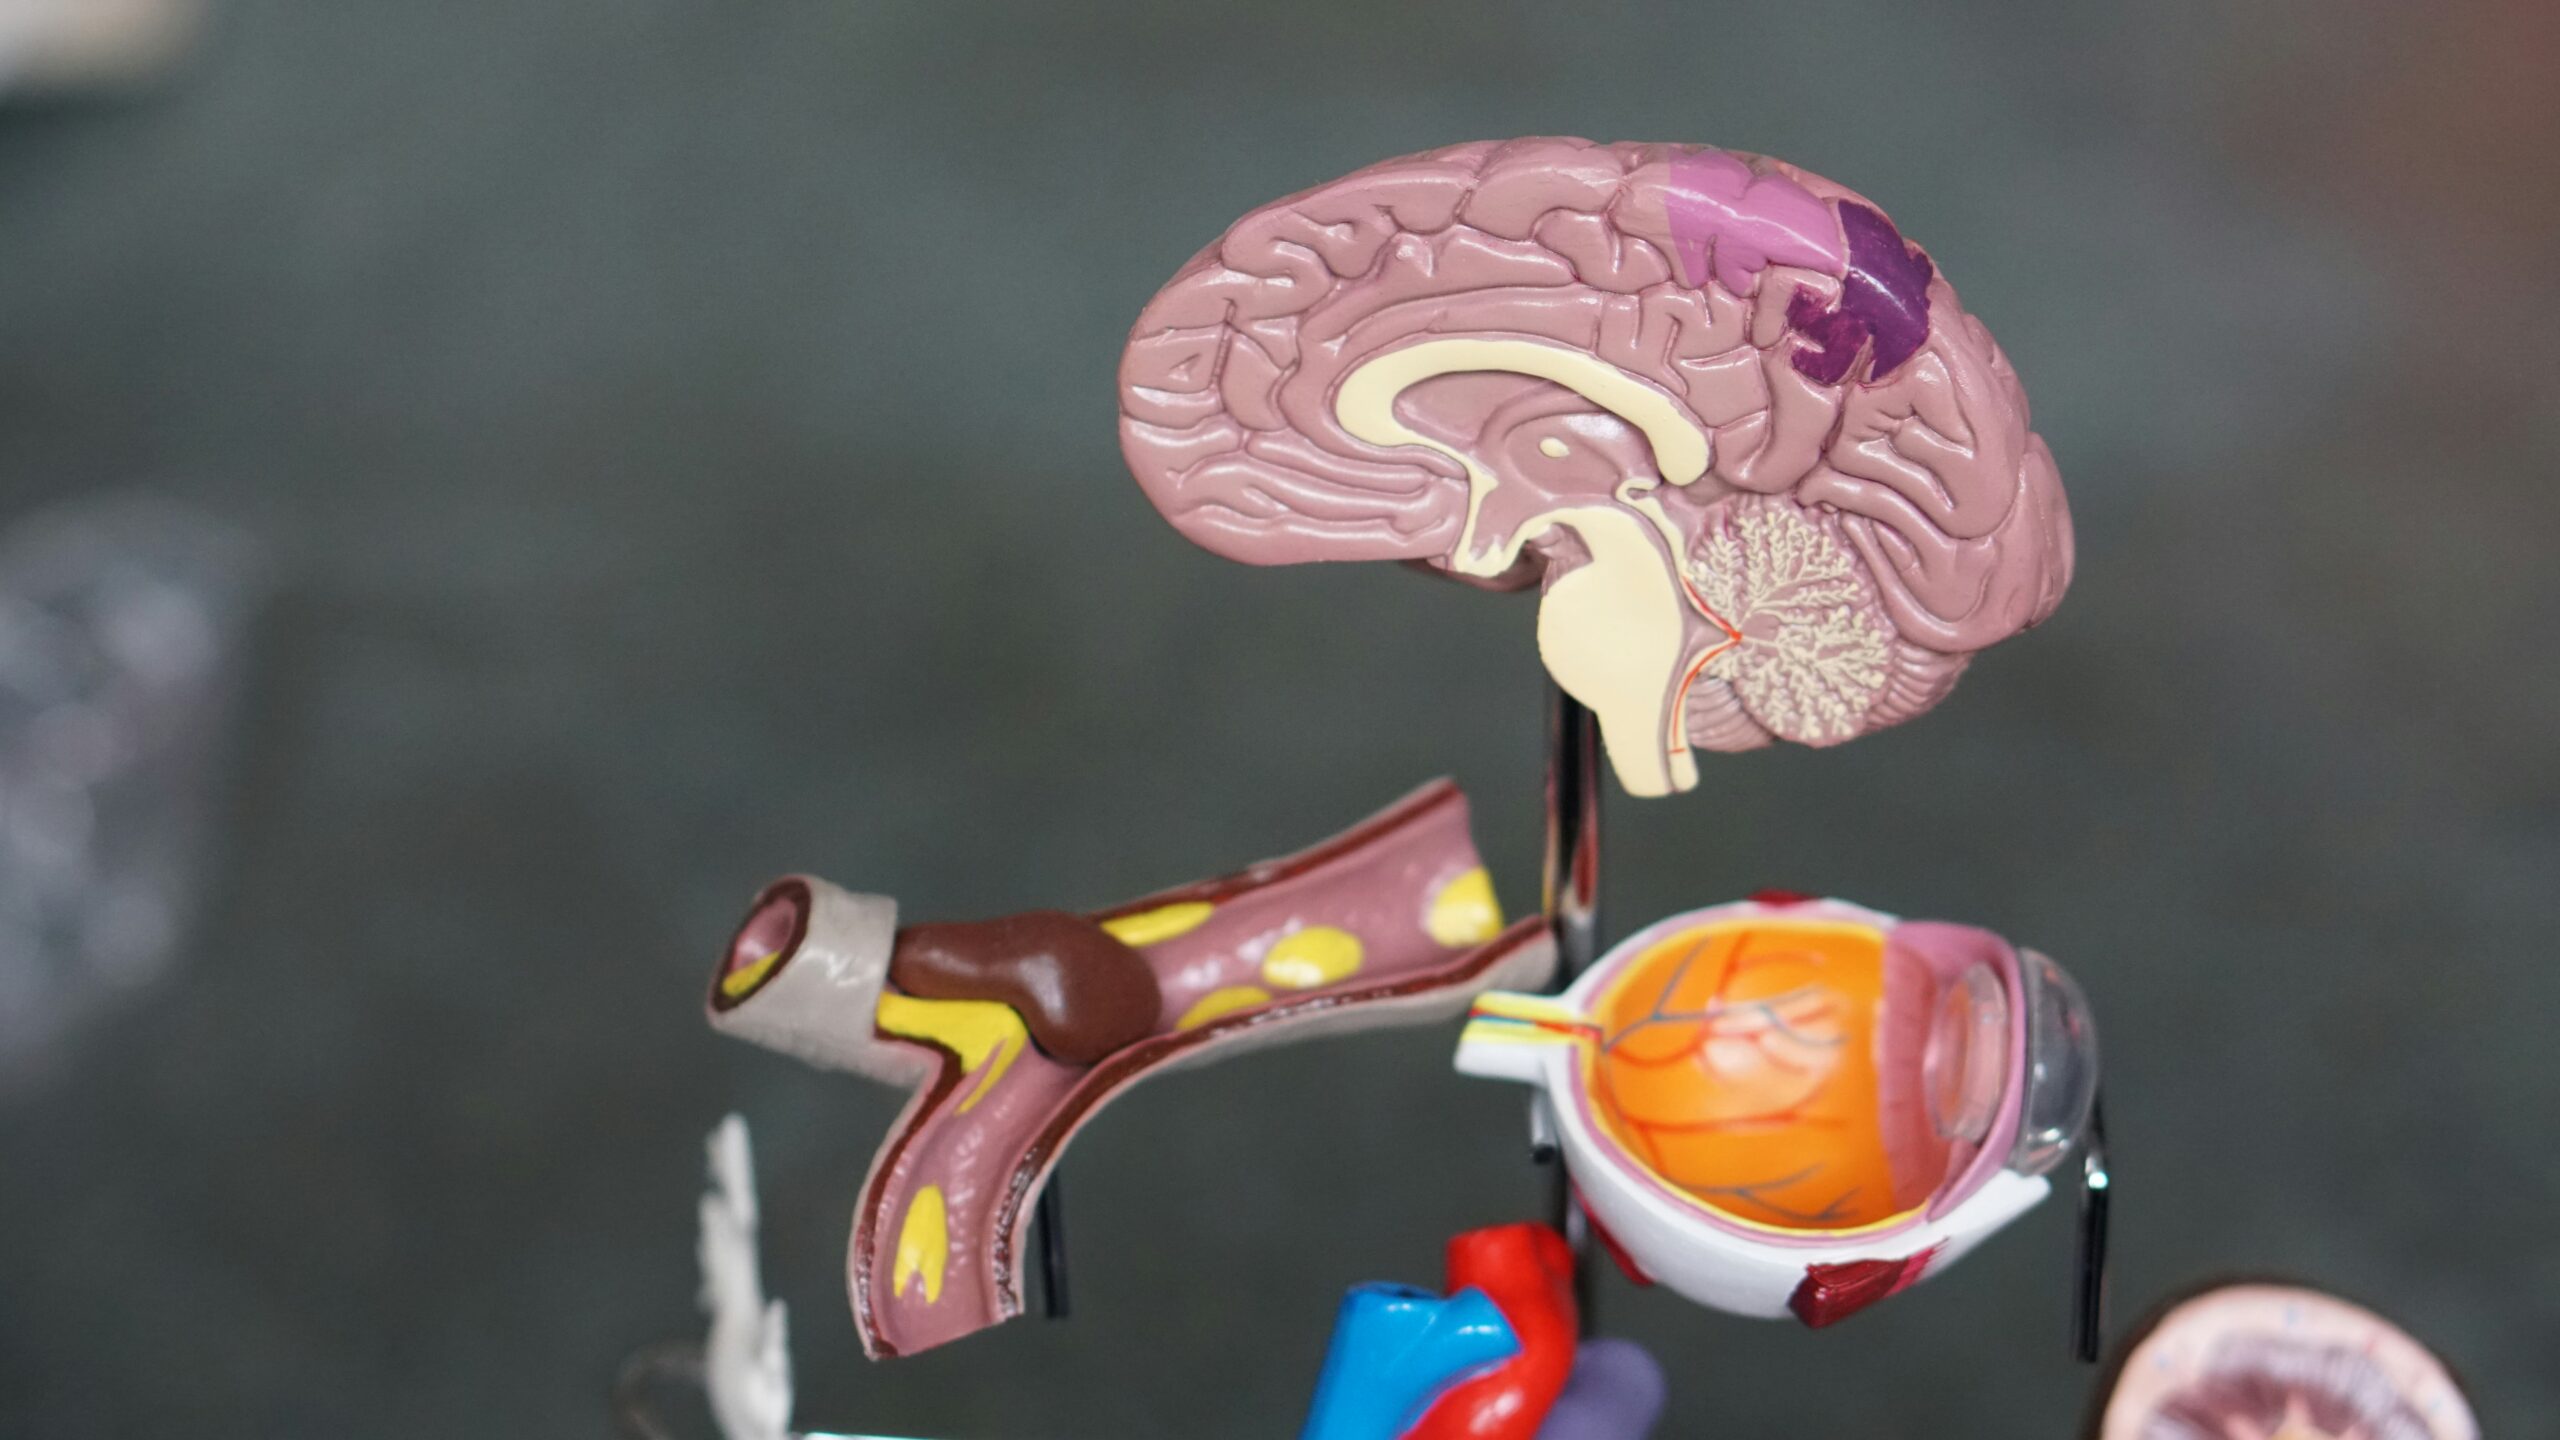 Rare Disease research demonstrated by an illustration of the brain.